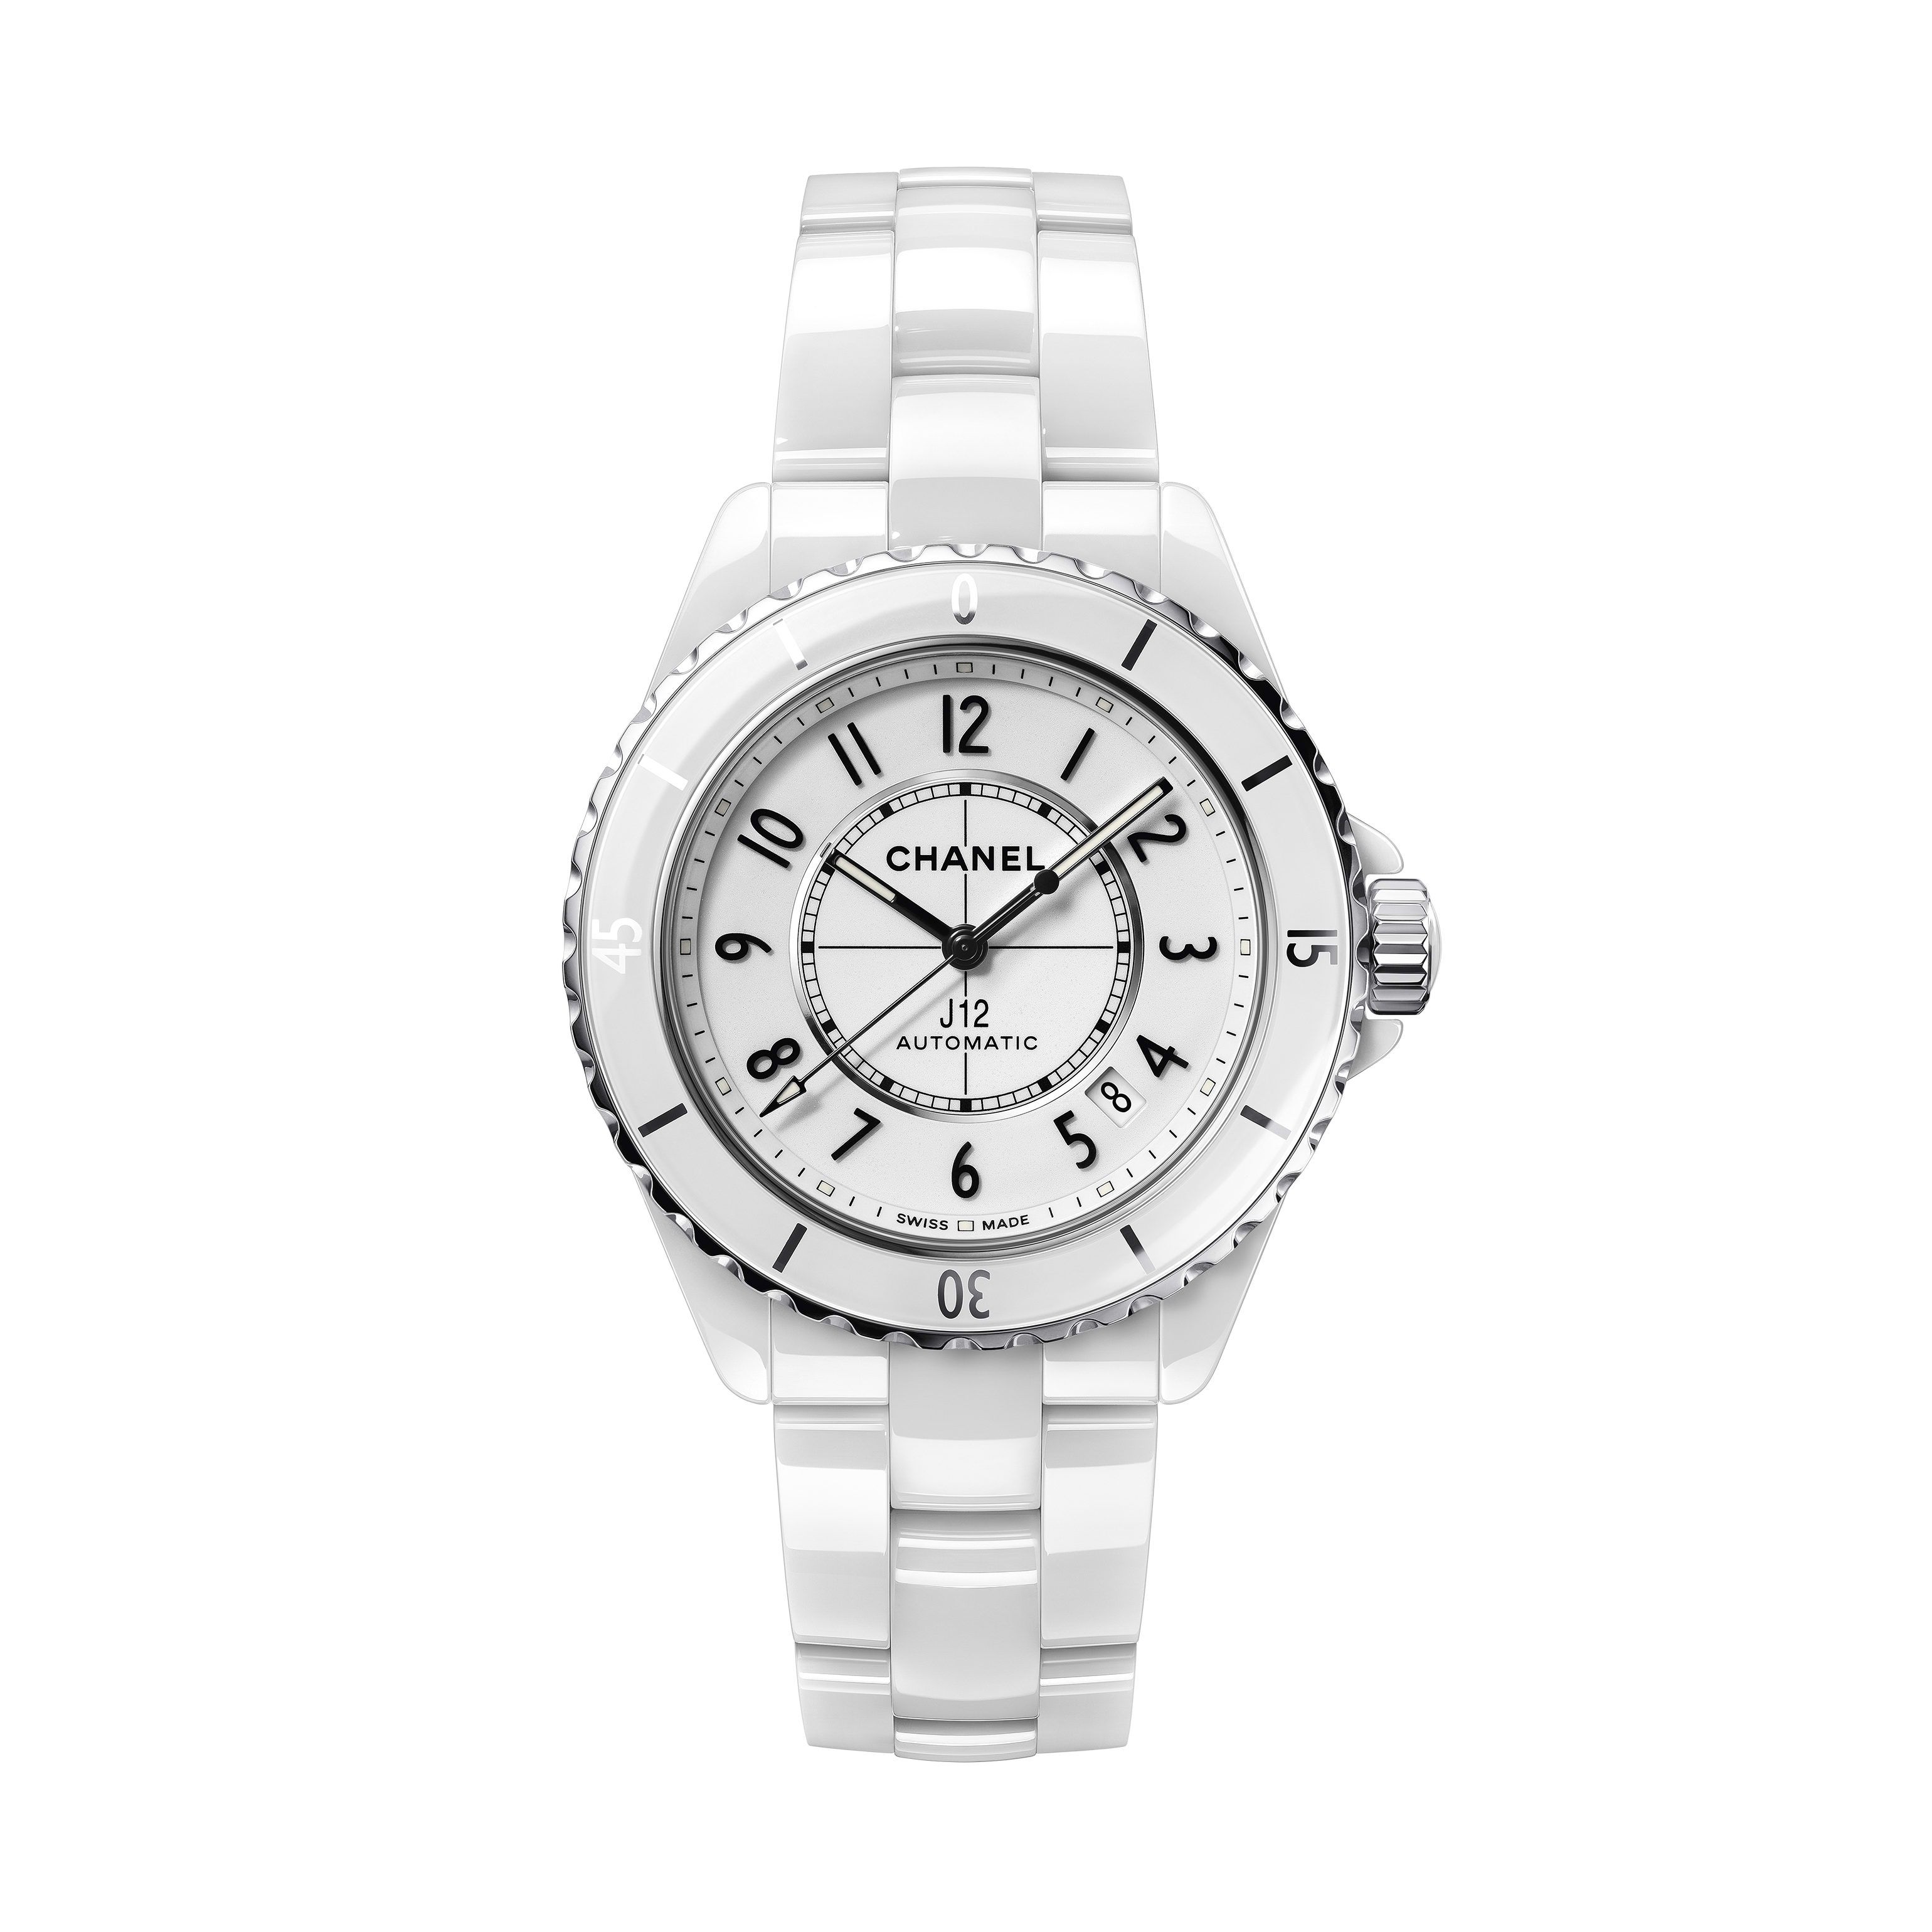 White highly resistant ceramic and steel | Chanel, Inc. (US)